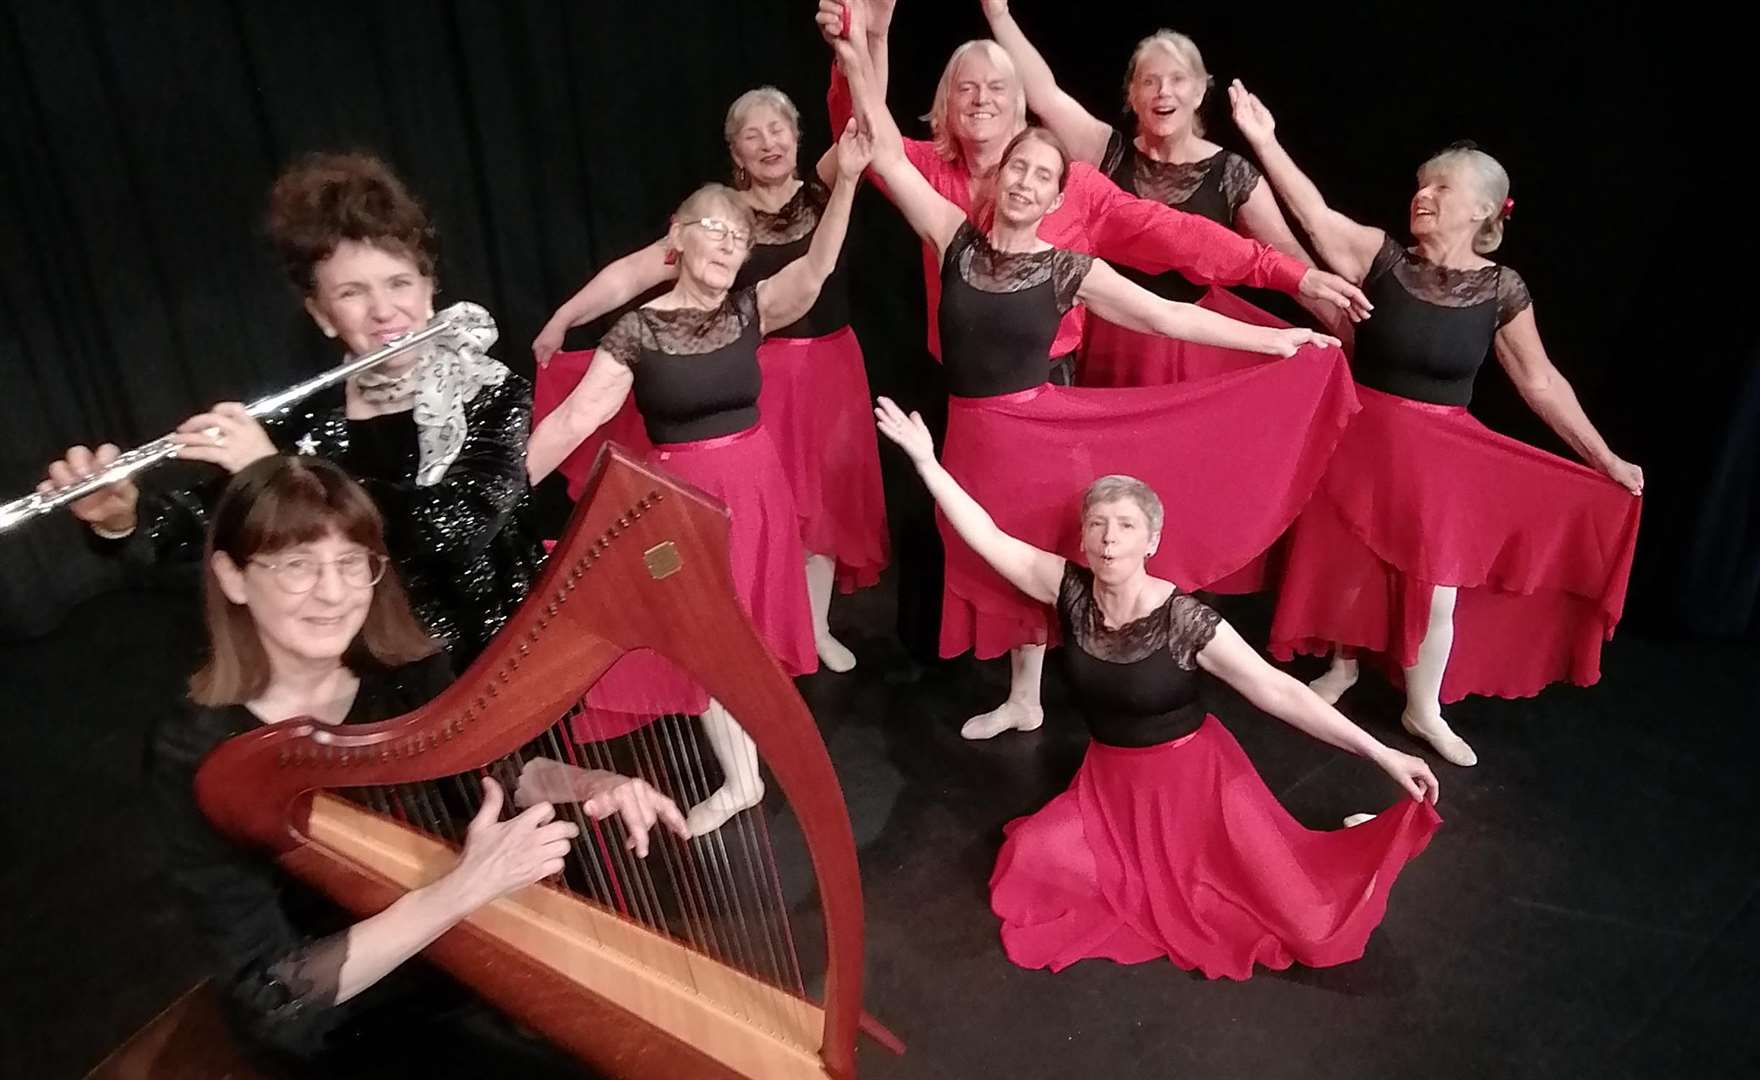 Sudbury Silver Swans filmed a dance for the global Silver Swans celebration day in October